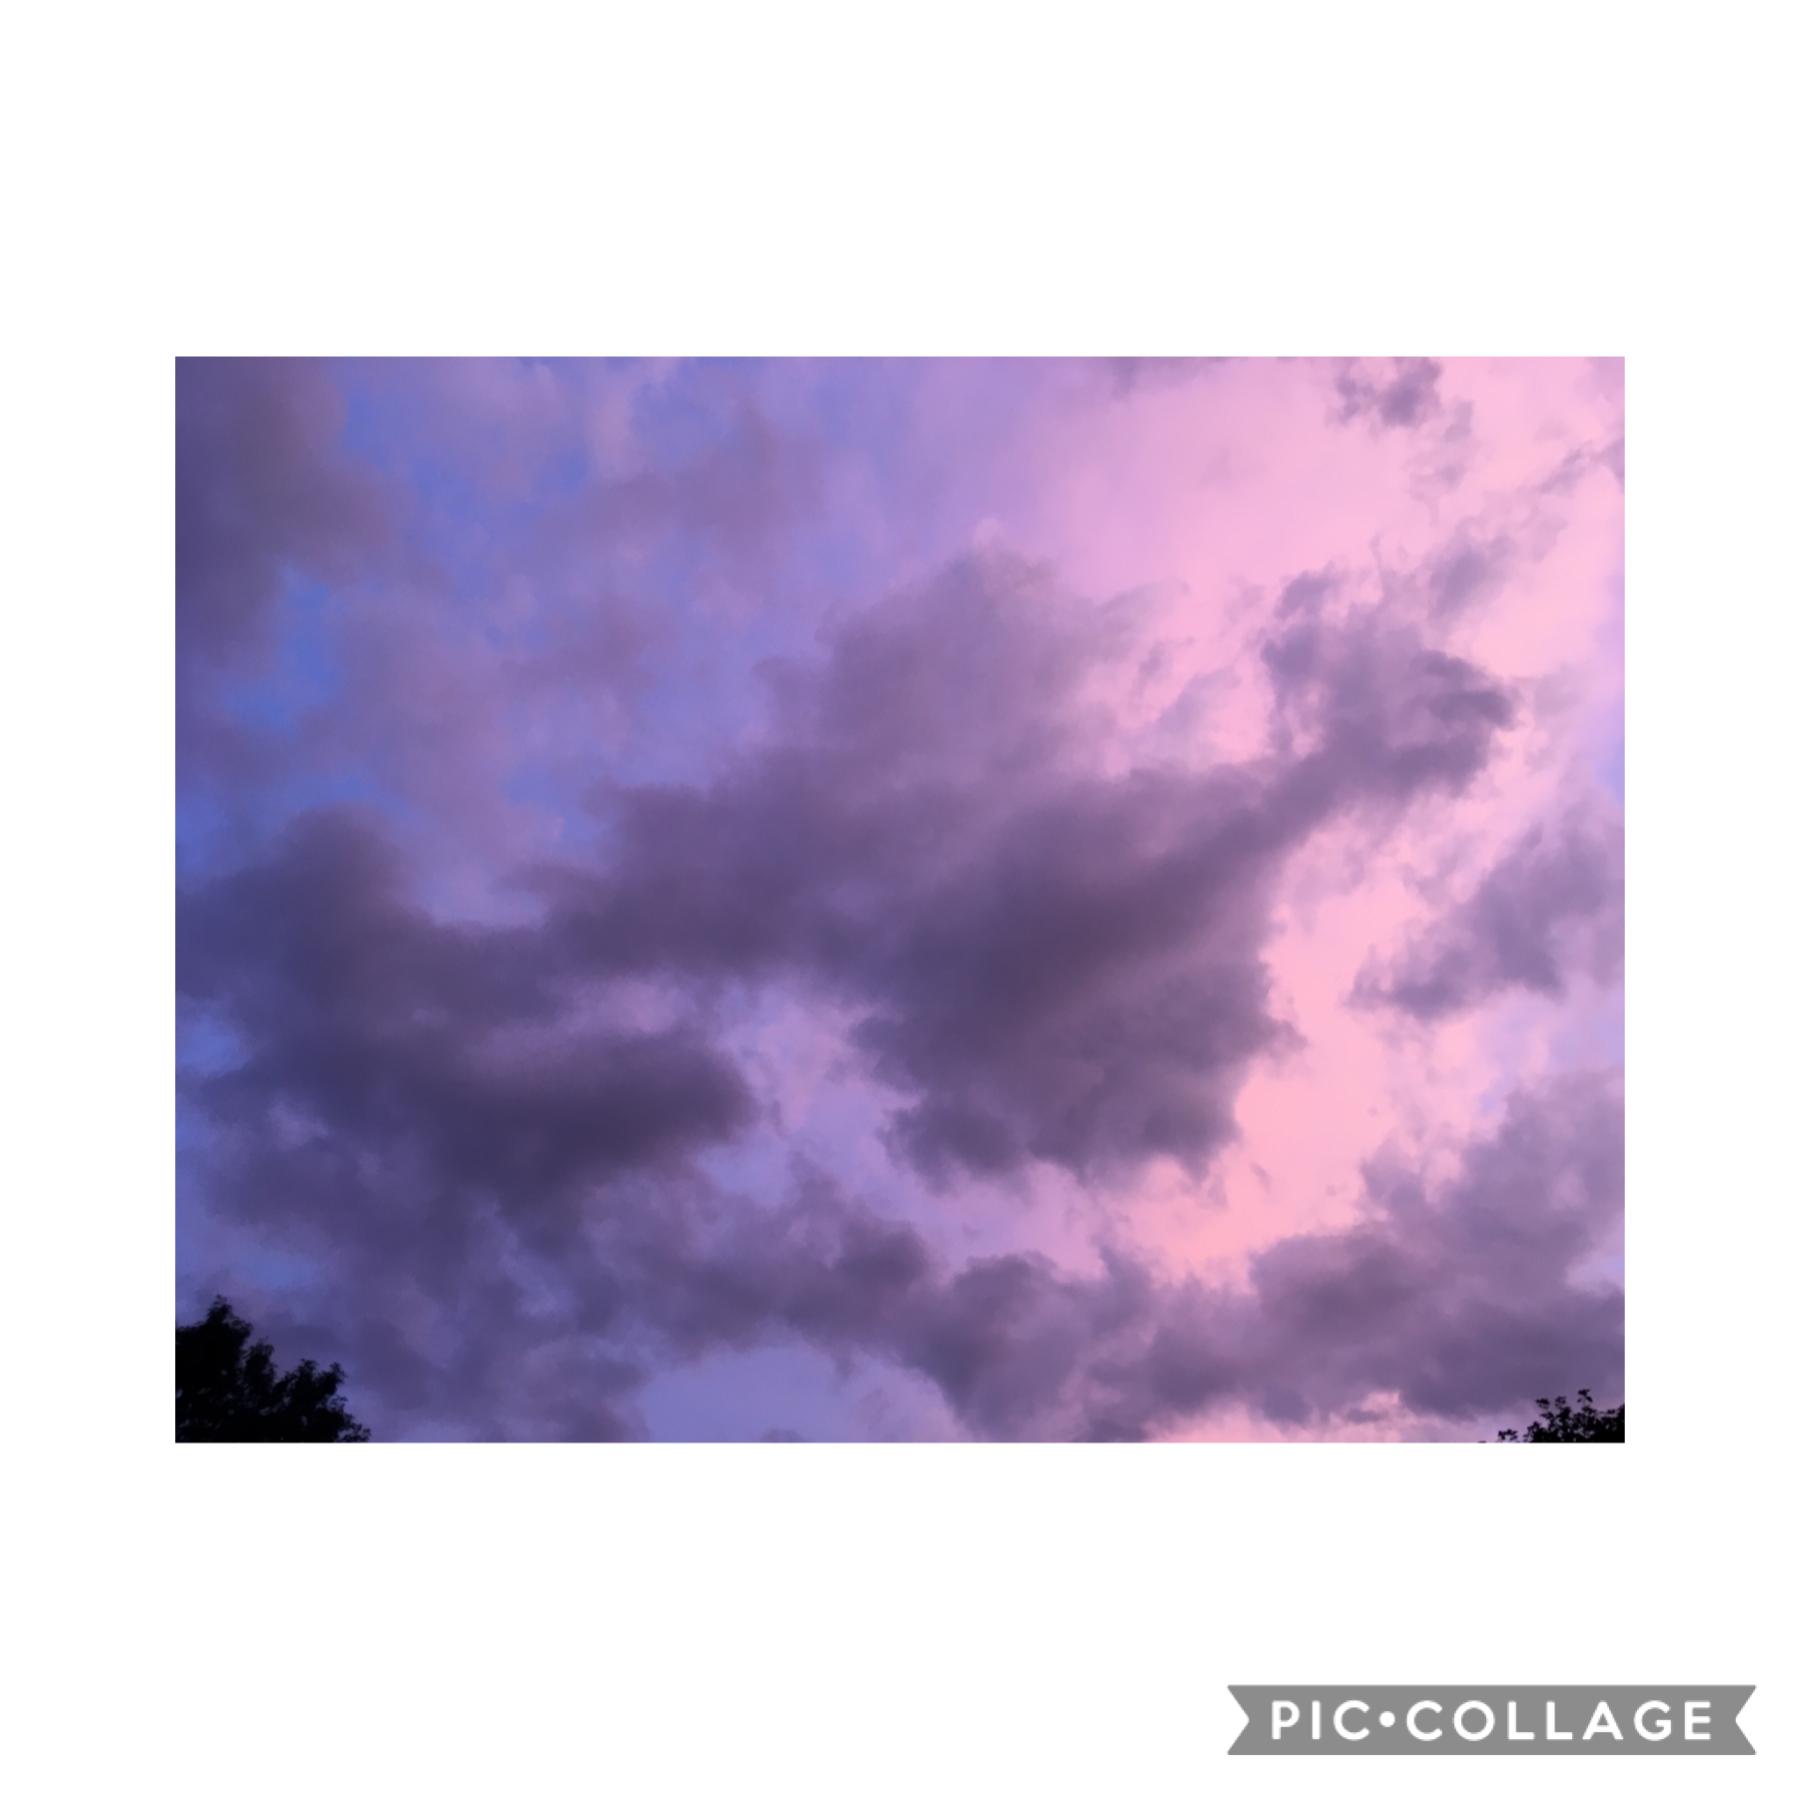 man the sky really said ✨☁️💗💜

bro I’m literally just vibin
the US History teacher still hasn’t graded my tests yet so I don’t know if I’m going to get out of taking it 😑
